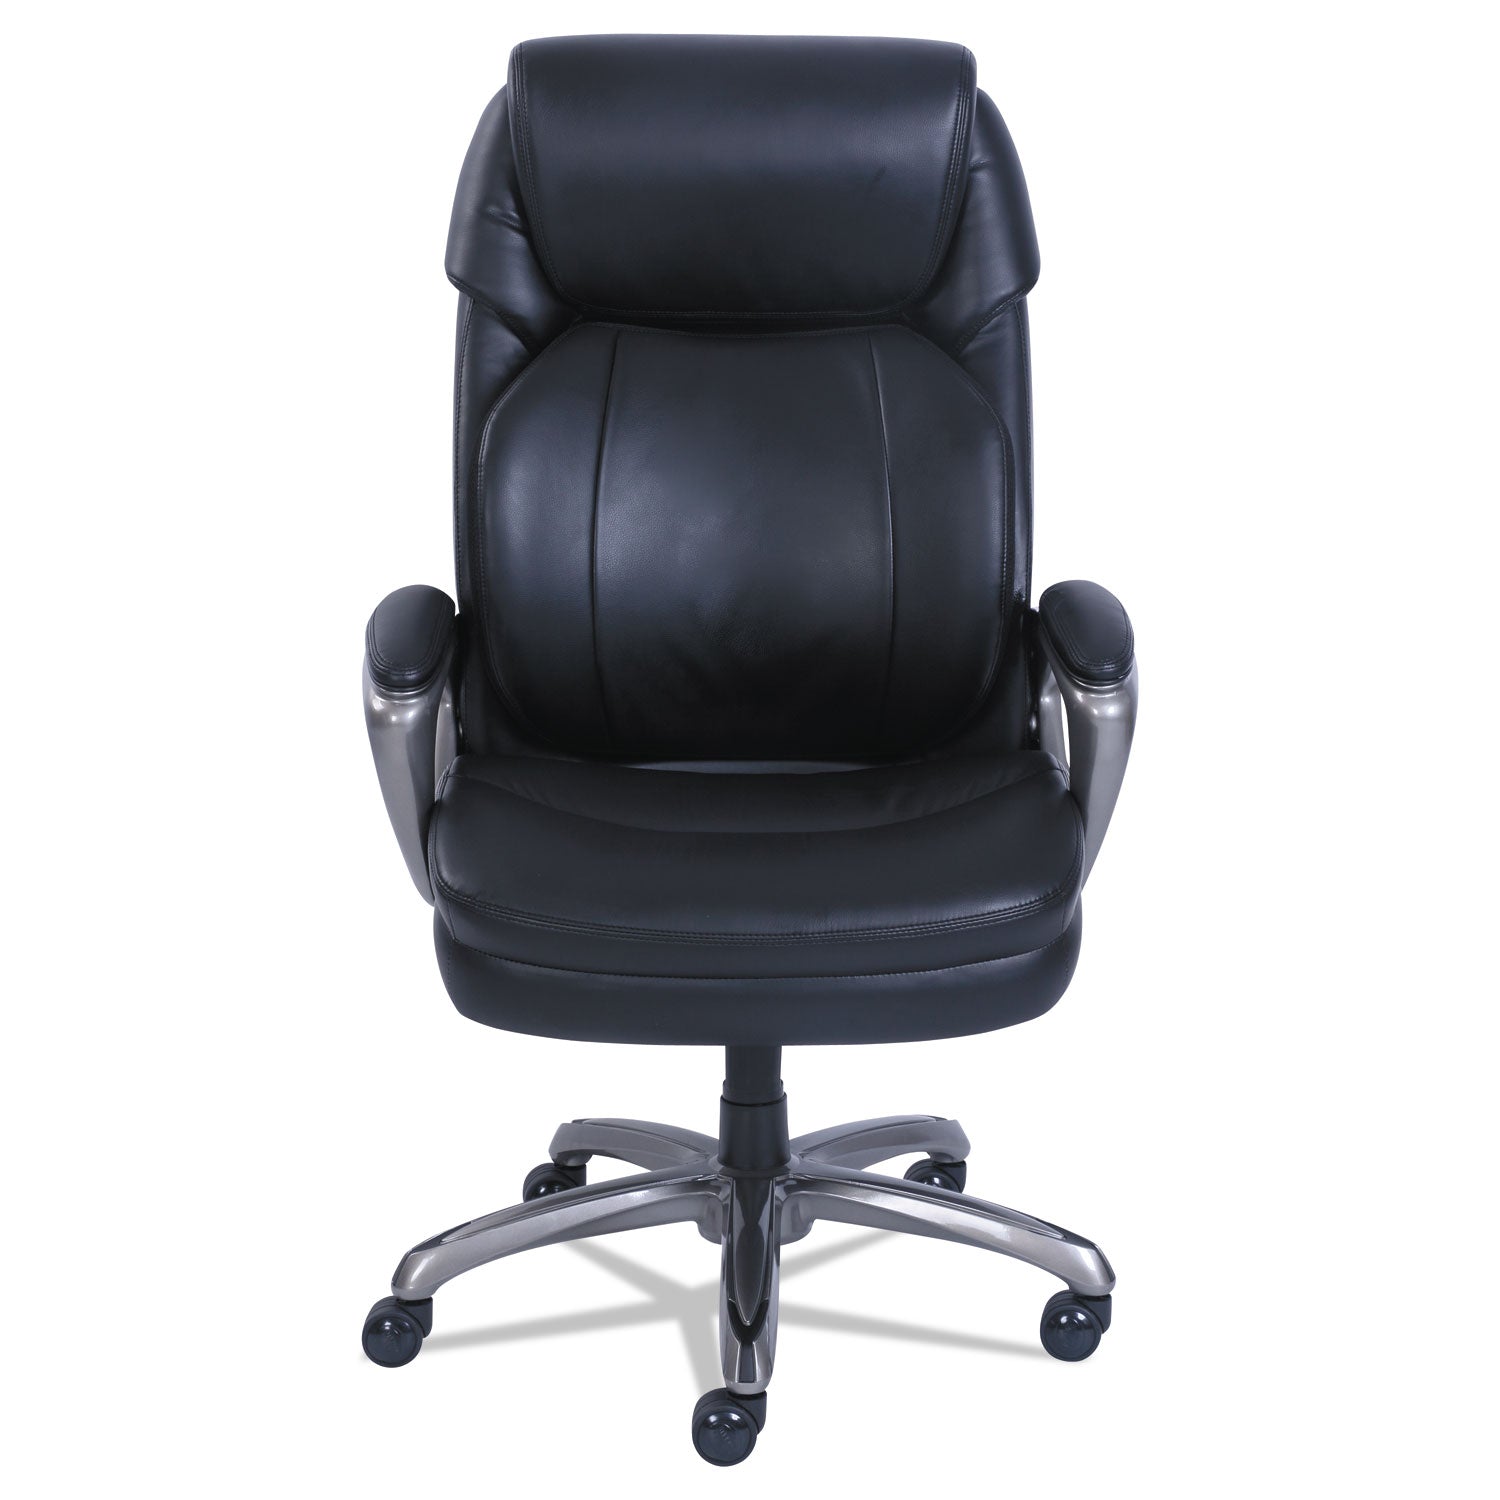 cosset-big-and-tall-executive-chair-supports-up-to-400-lb-19-to-22-seat-height-black-seat-back-slate-base_srj48964 - 4